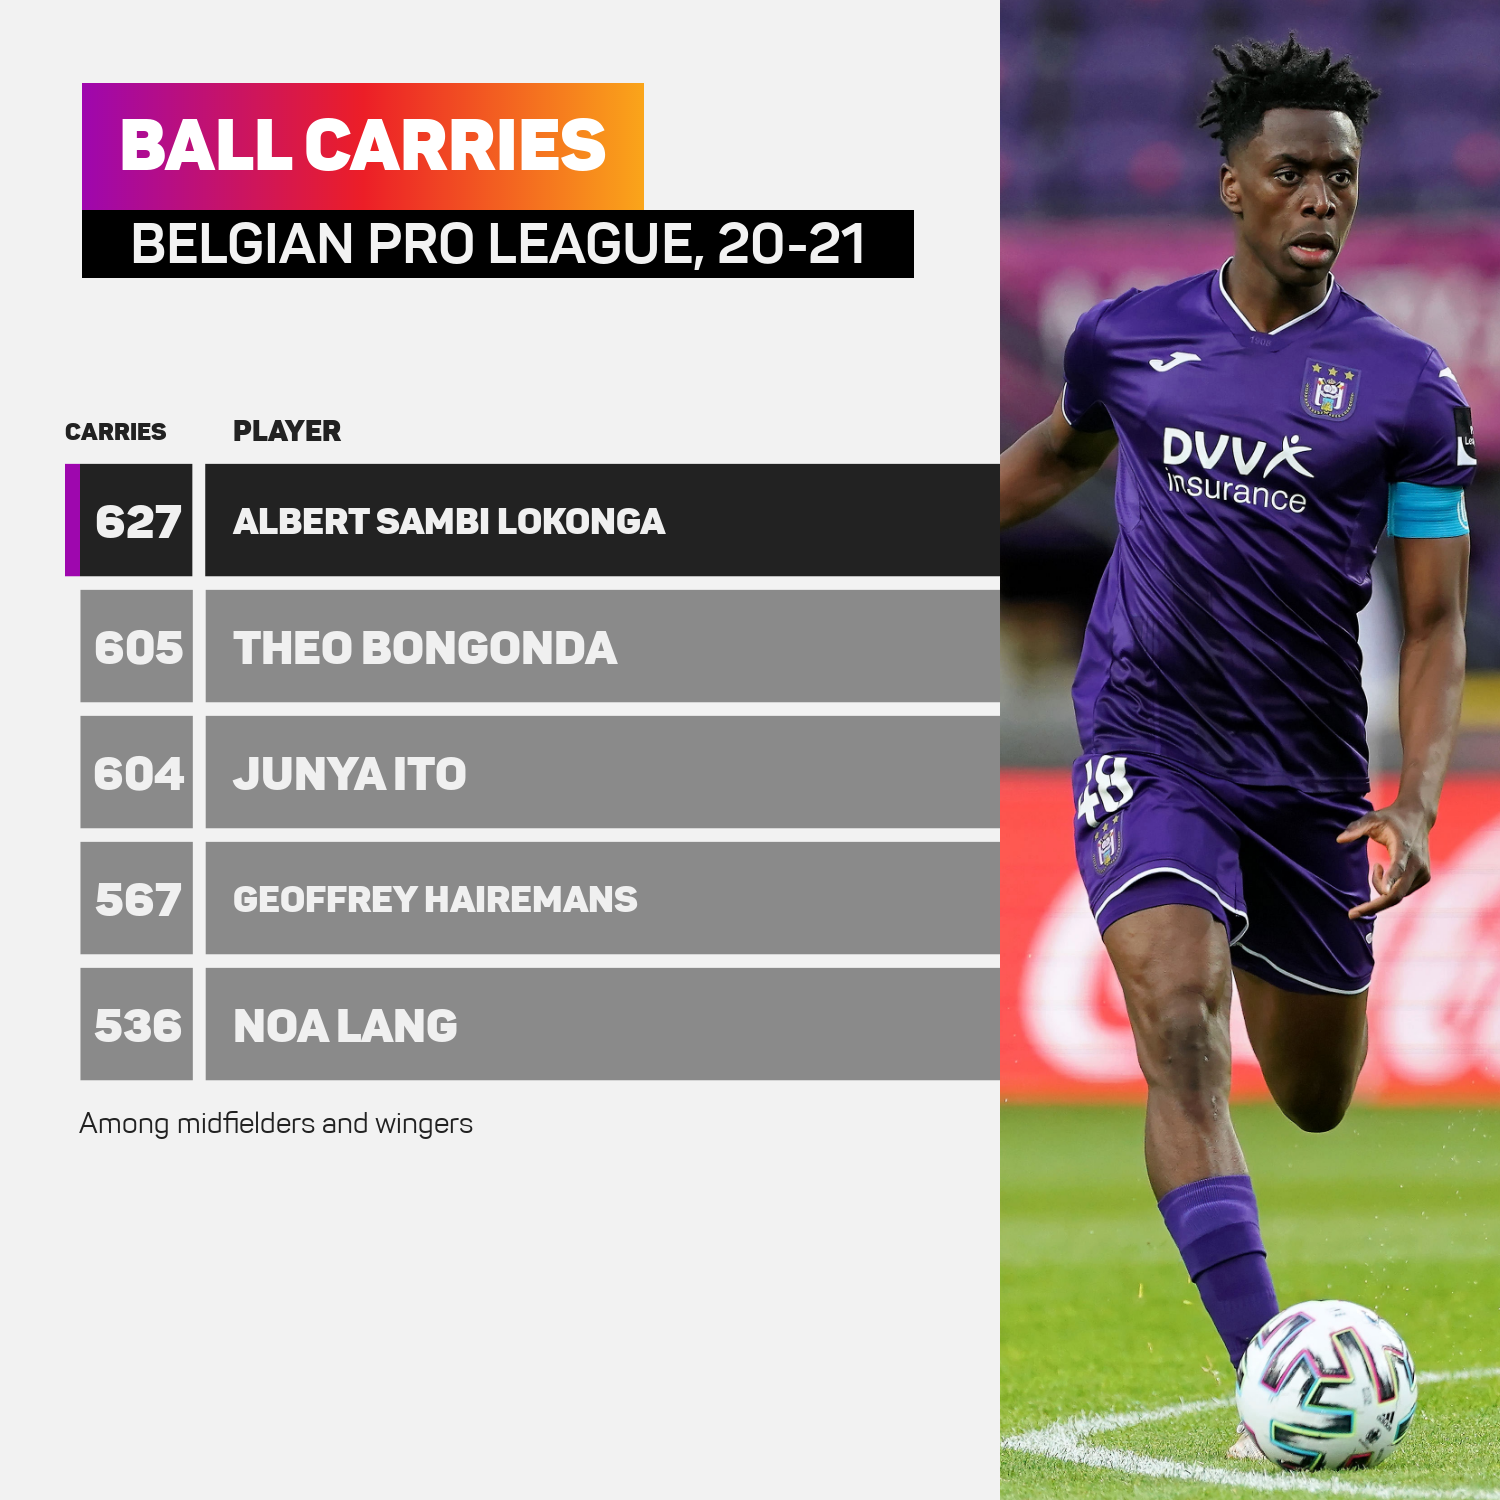 Albert Sambi Lokonga recorded more ball carries than any other midfielder or winger in the Belgian Pro League last season